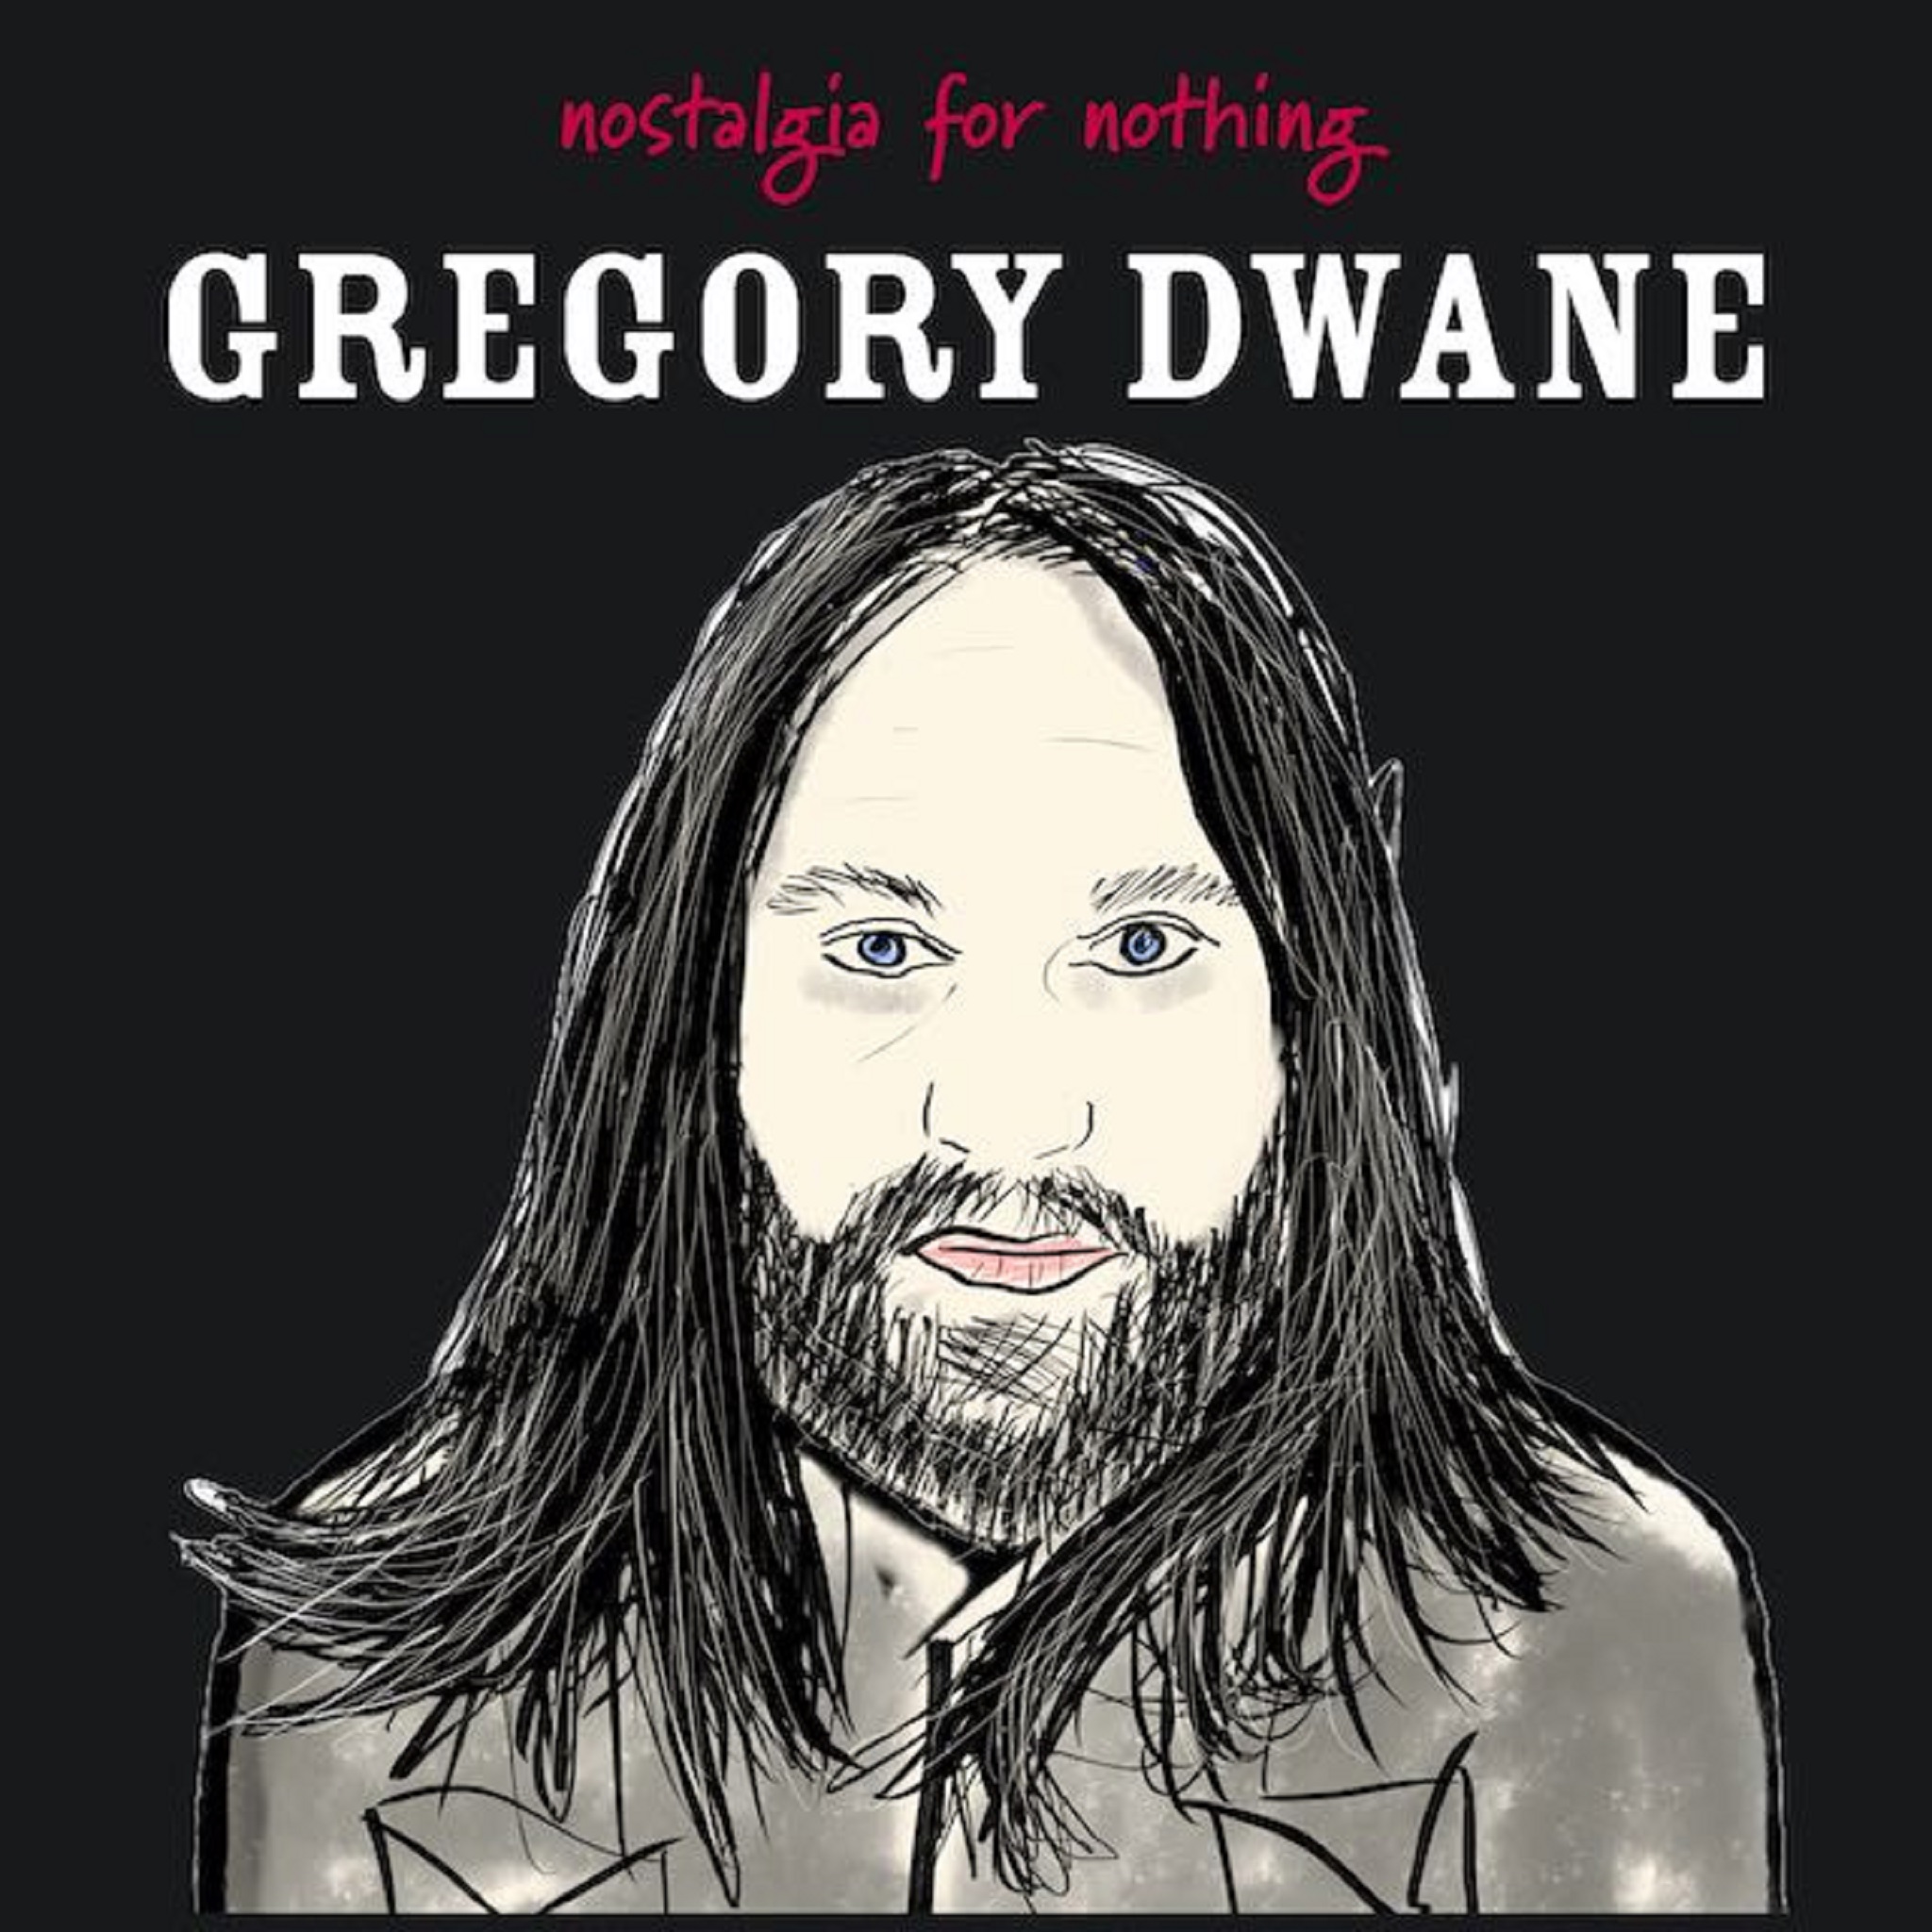 GREGORY DWANE ANNOUNCES HIS SOPHOMORE ALBUM "NOSTALGIA FOR NOTHING" - A MUSICAL DIARY SET FOR RELEASE ON NOVEMBER 17TH